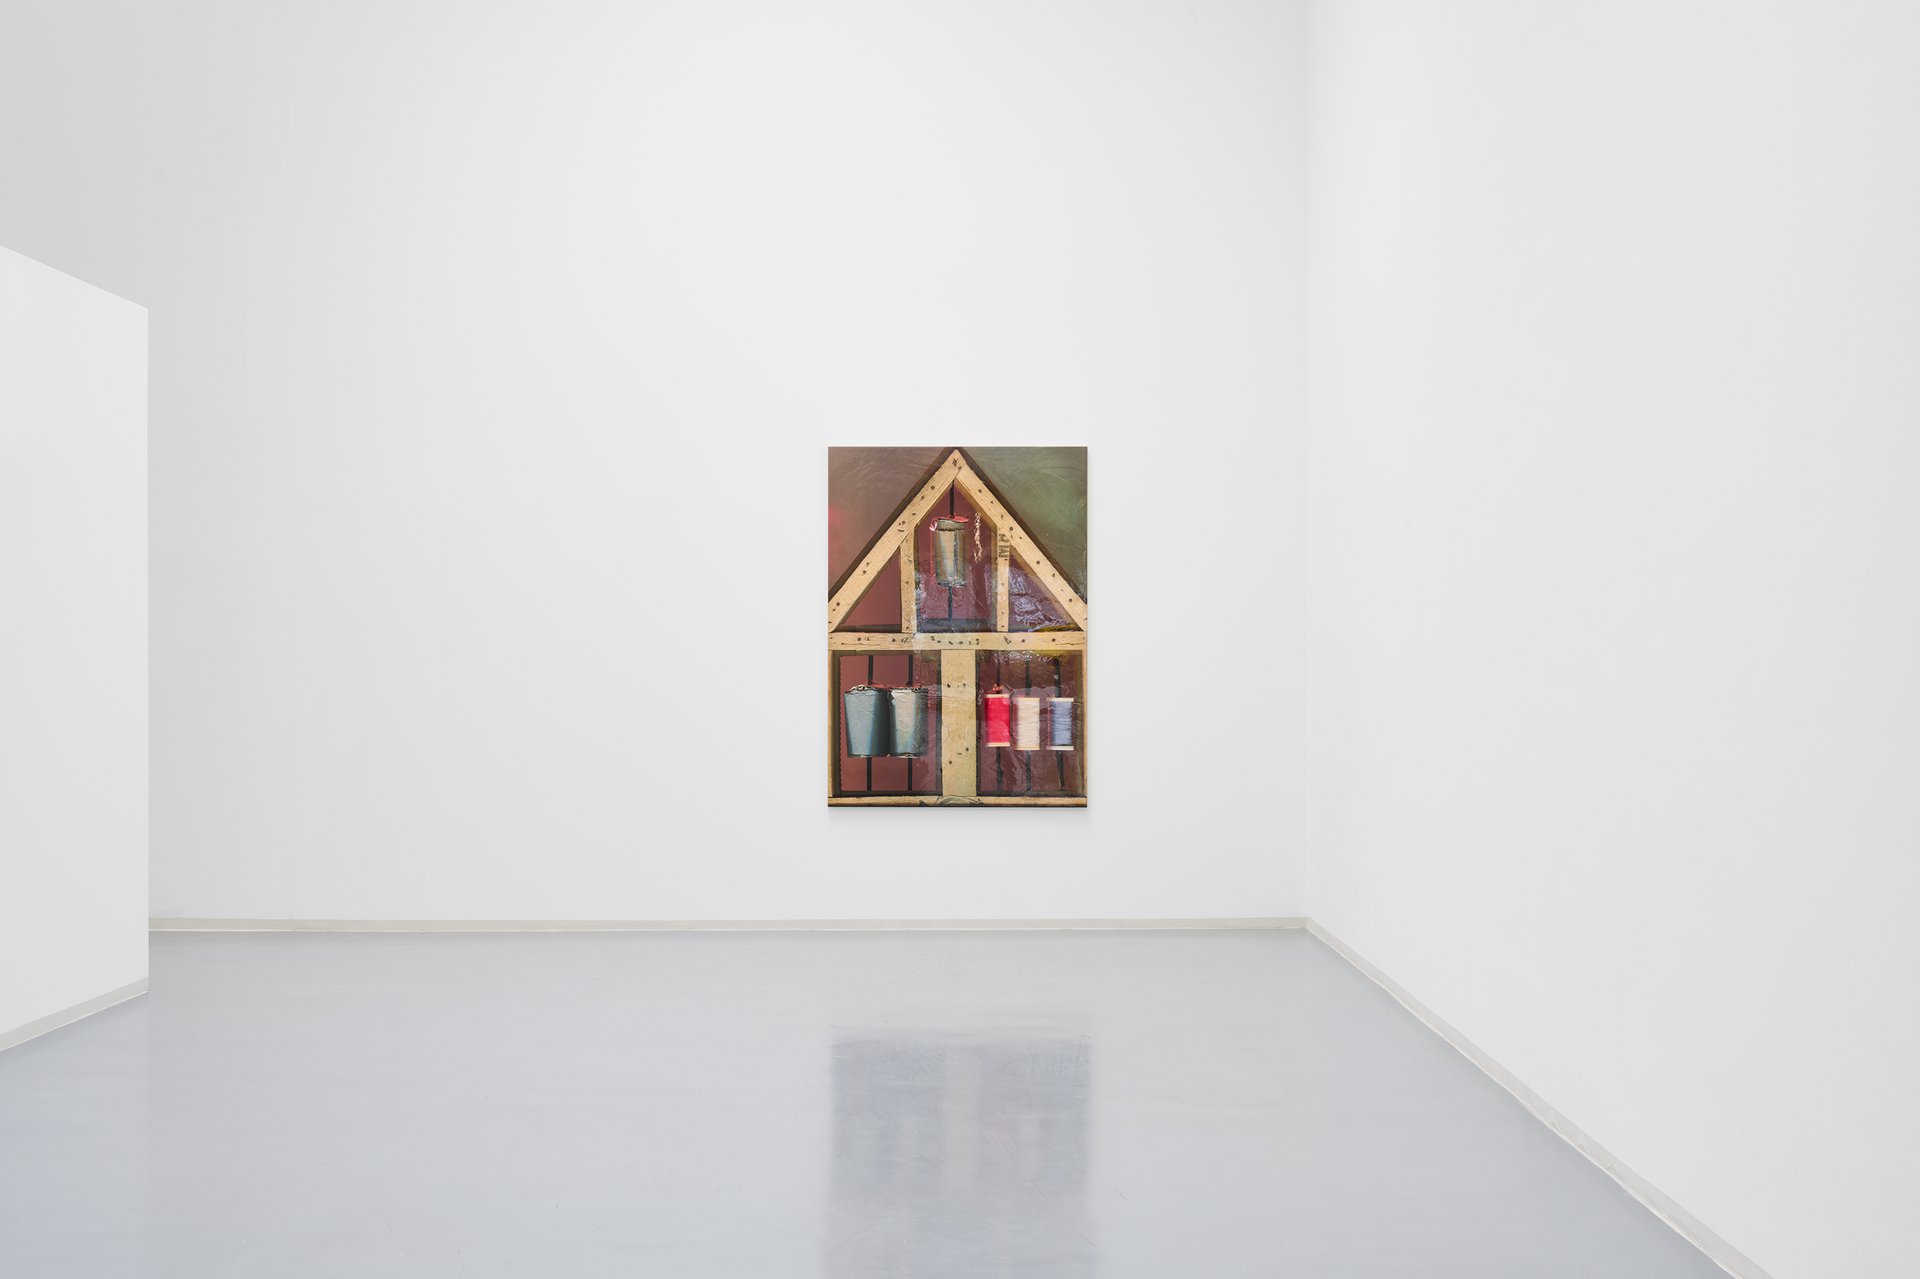 Lucie Stahl, House of Prayer, installation view, Lucie Stahl: Seven Sisters, Bonner Kunstverein, 2022.  Courtesy the artist, Cabinet Gallery, London, dépendance, Brussels, Fitzpatrick Gallery, Paris and Los Angeles, and Galerie Meyer Kainer, Vienna. Photo: Mareike Tocha.